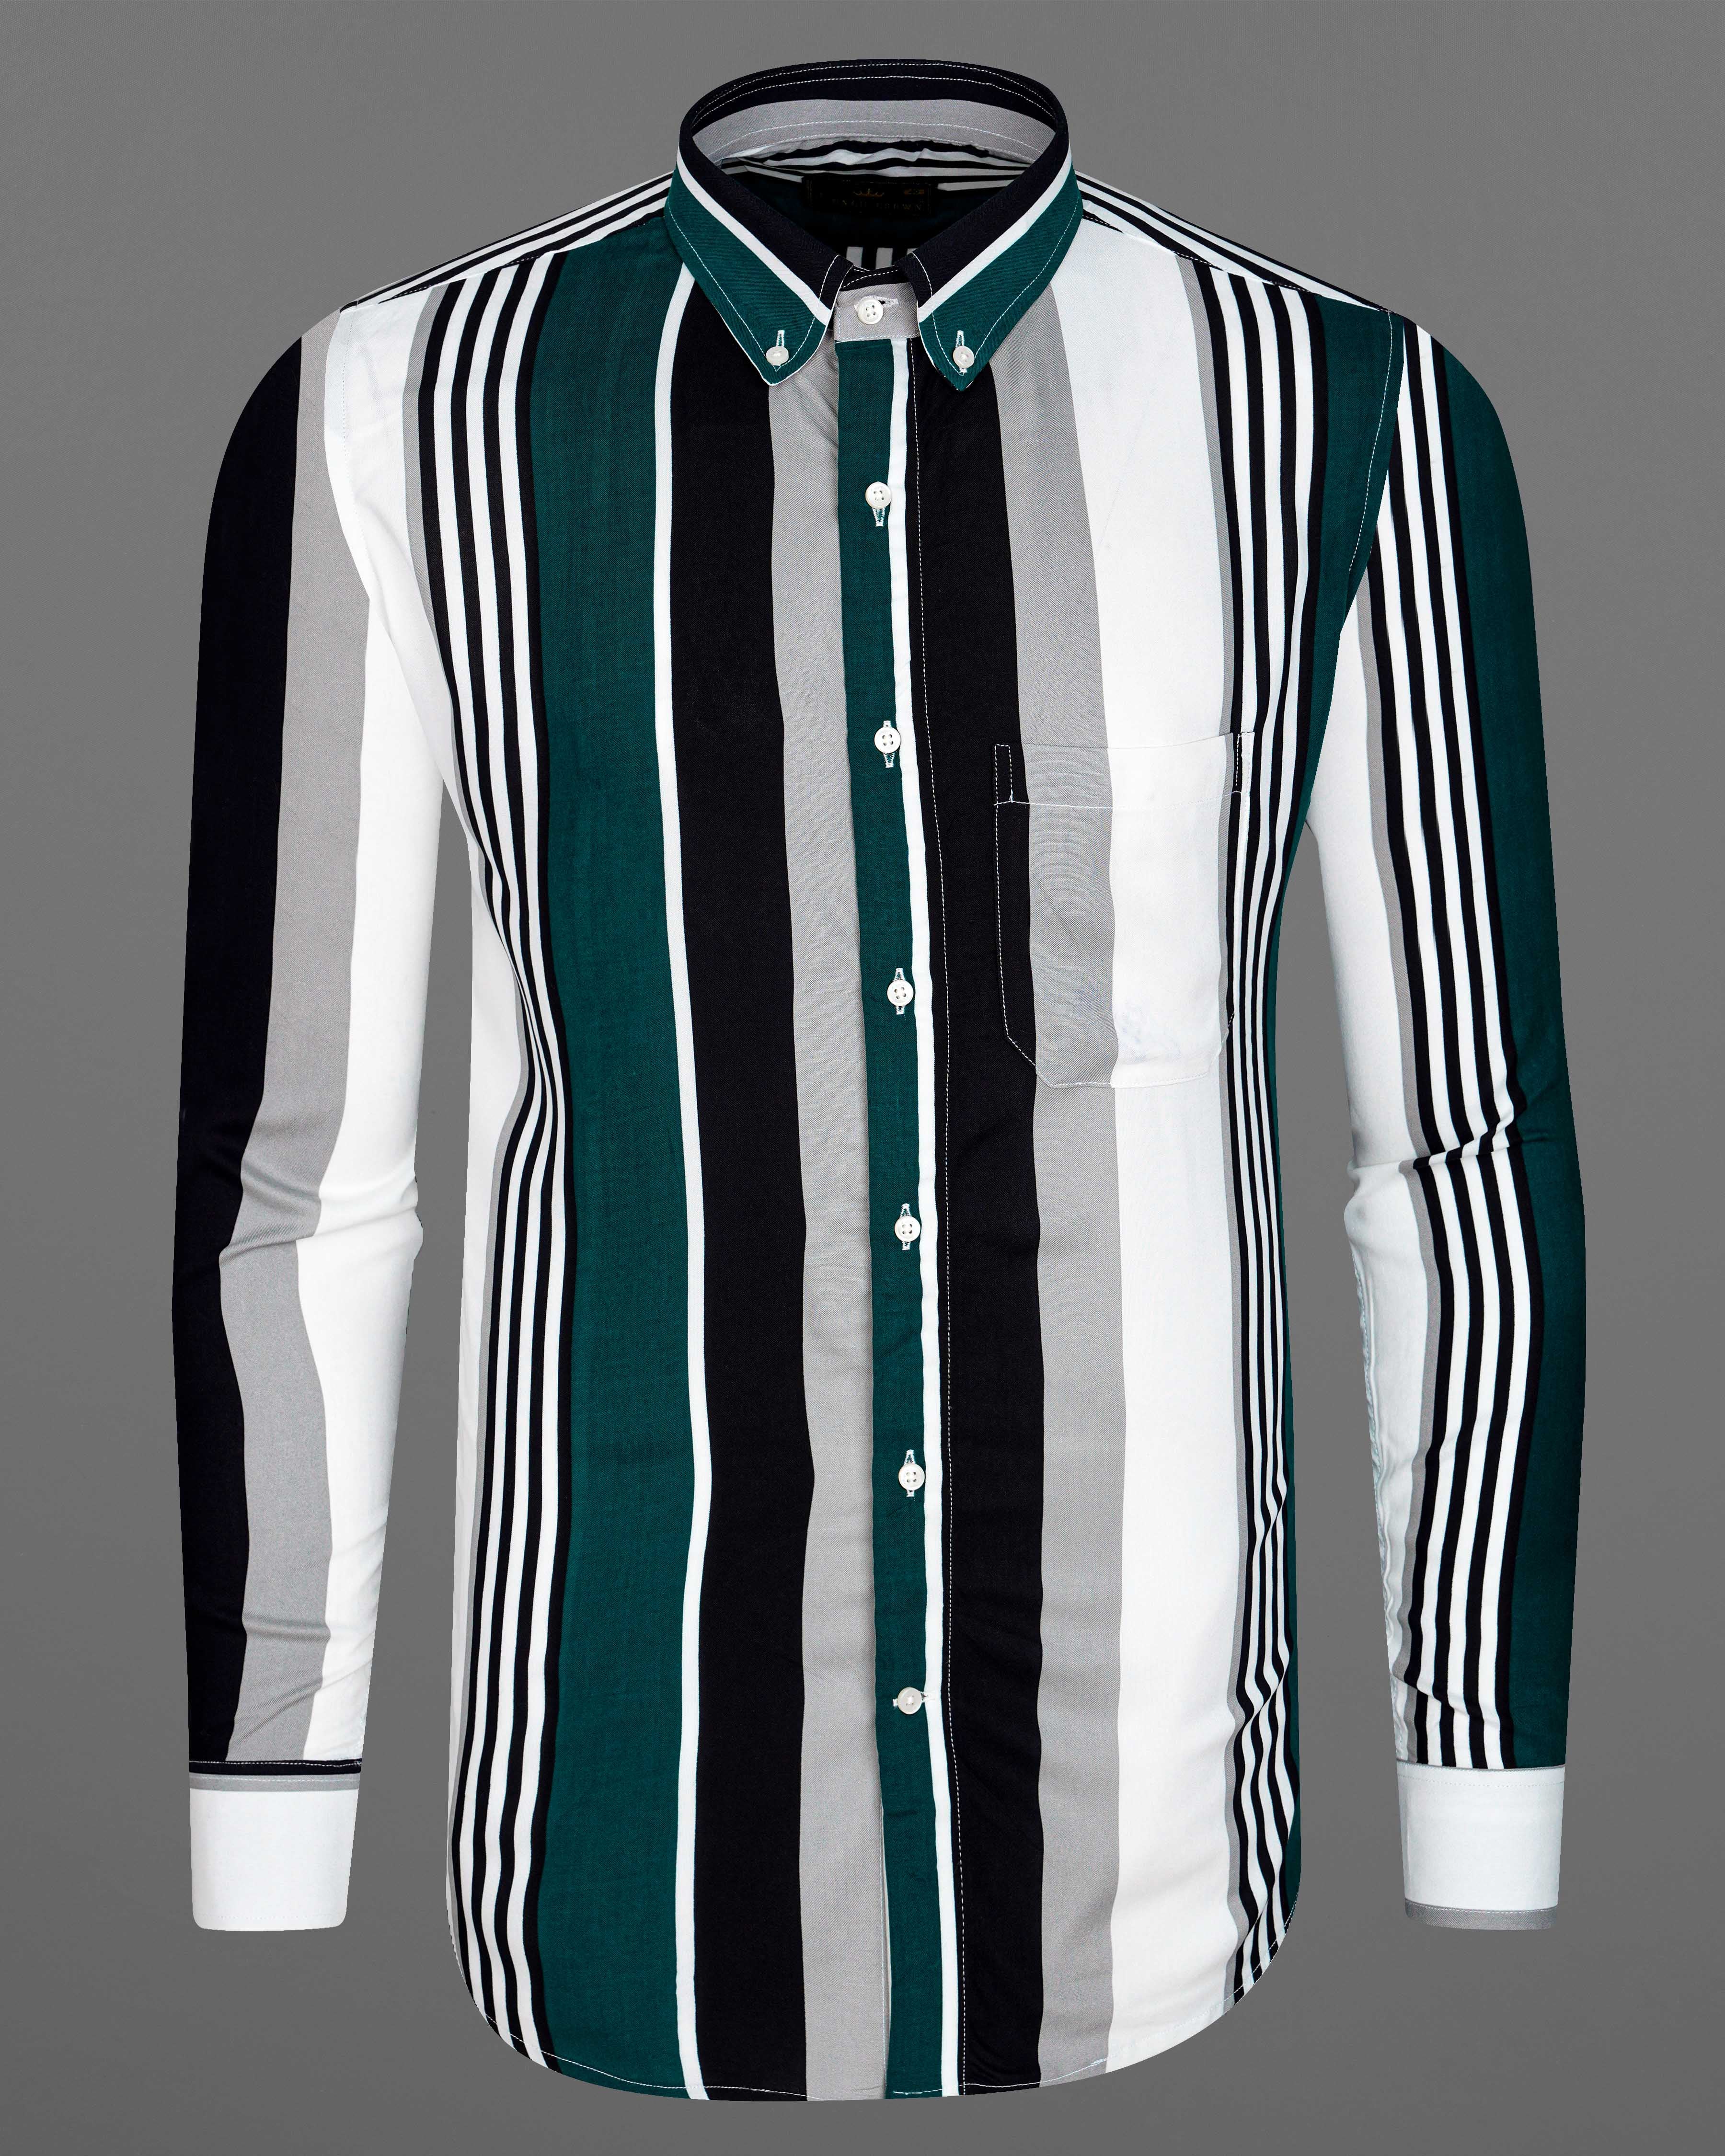 Daintree Green with Black and White Striped Premium Tencel Shirt  8611-BD-38,8611-BD-H-38,8611-BD-39,8611-BD-H-39,8611-BD-40,8611-BD-H-40,8611-BD-42,8611-BD-H-42,8611-BD-44,8611-BD-H-44,8611-BD-46,8611-BD-H-46,8611-BD-48,8611-BD-H-48,8611-BD-50,8611-BD-H-50,8611-BD-52,8611-BD-H-52